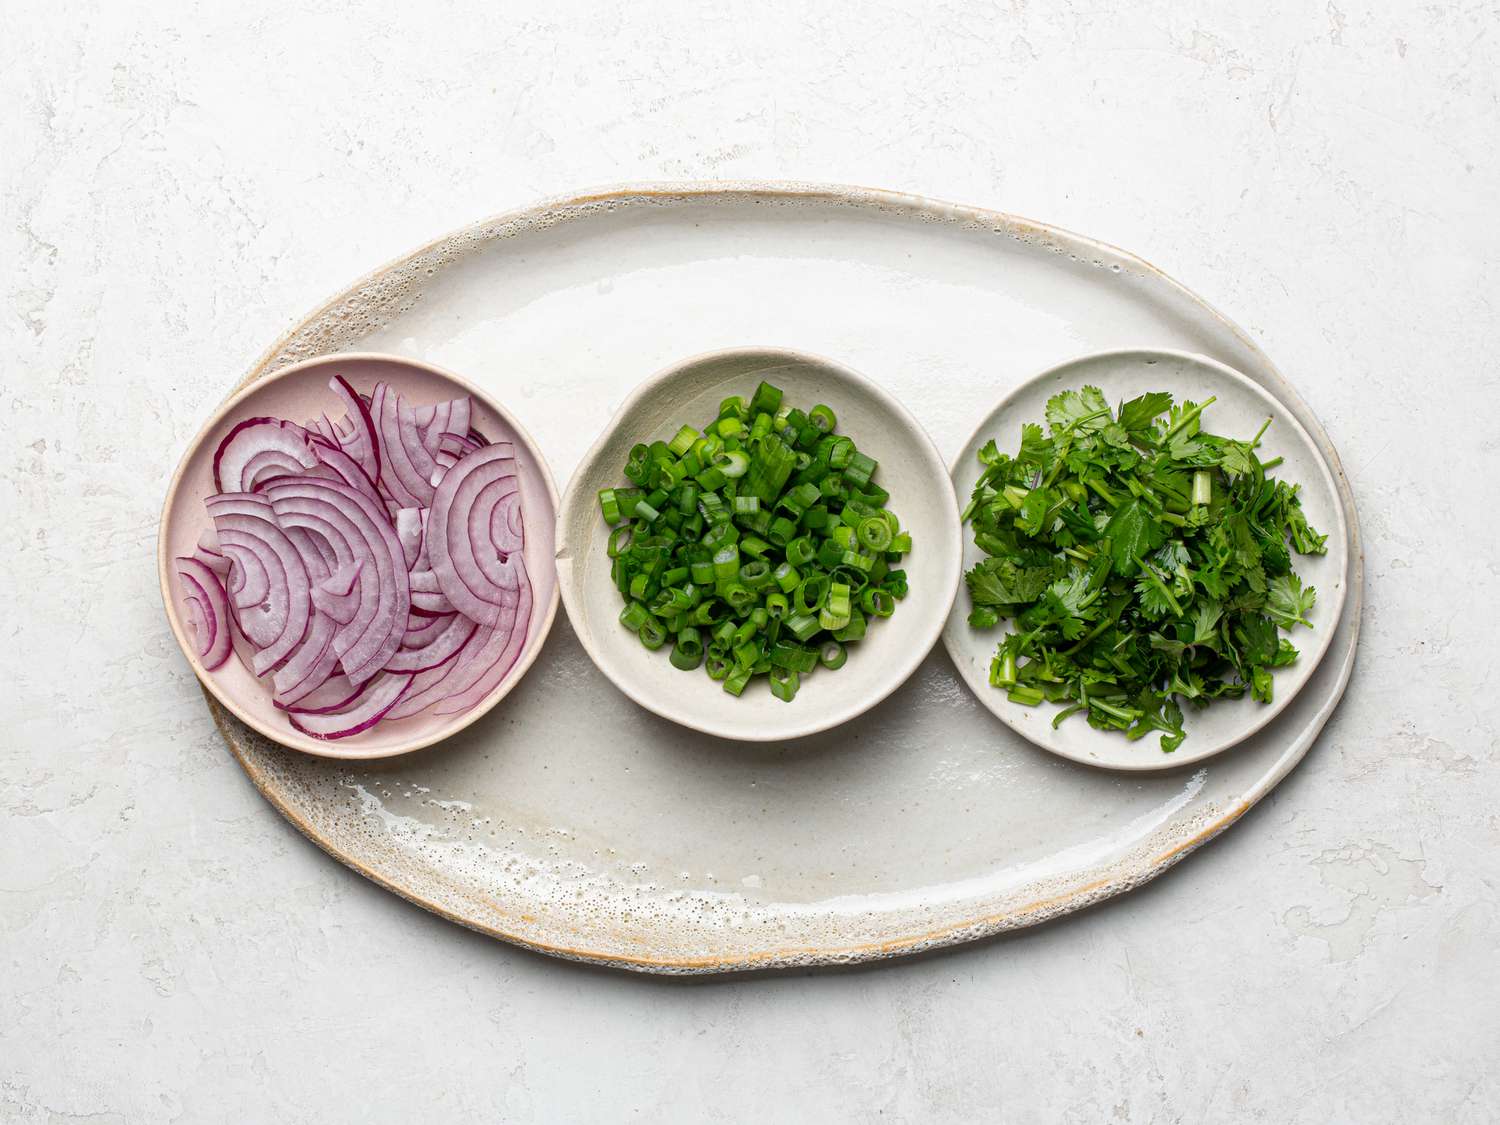 Onions, chives, and cilantro in small bowls